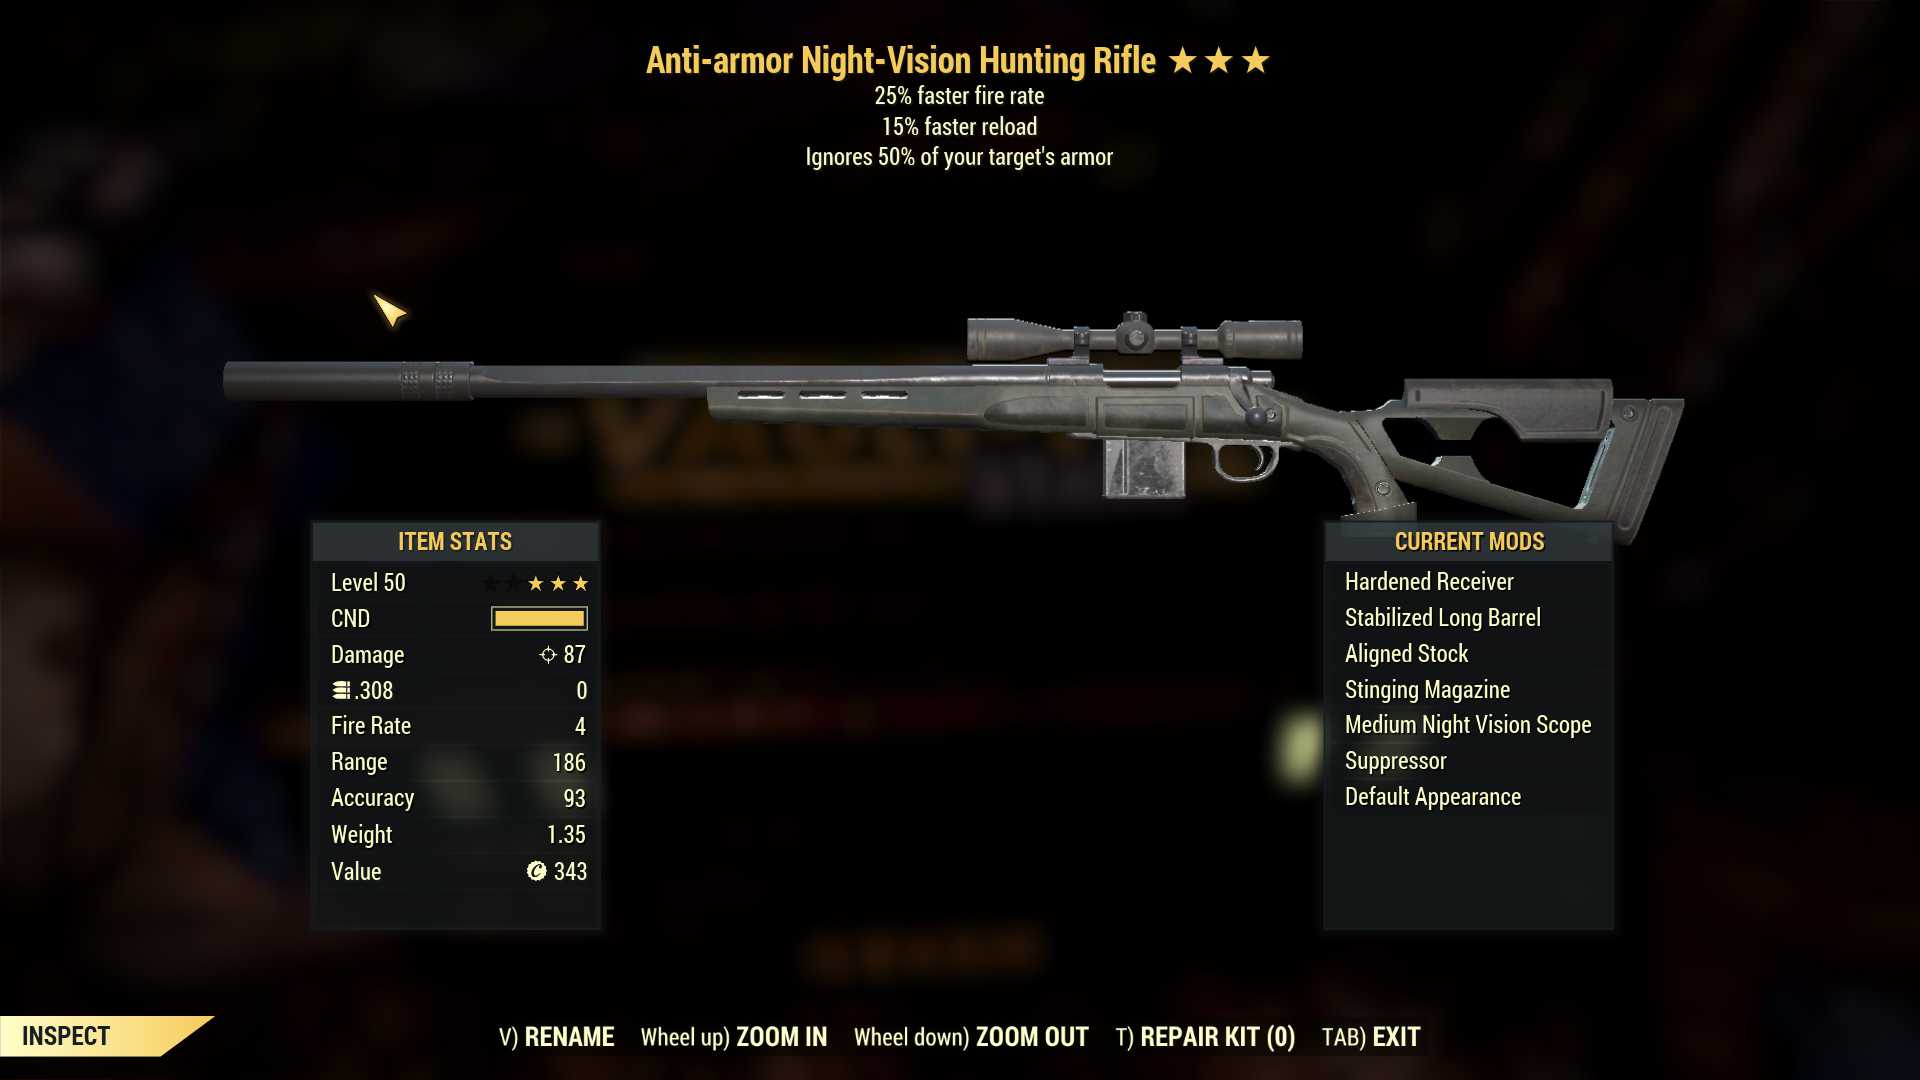 Anti-Armor Hunting Rifle (25% faster fire rate, 15% faster reload)